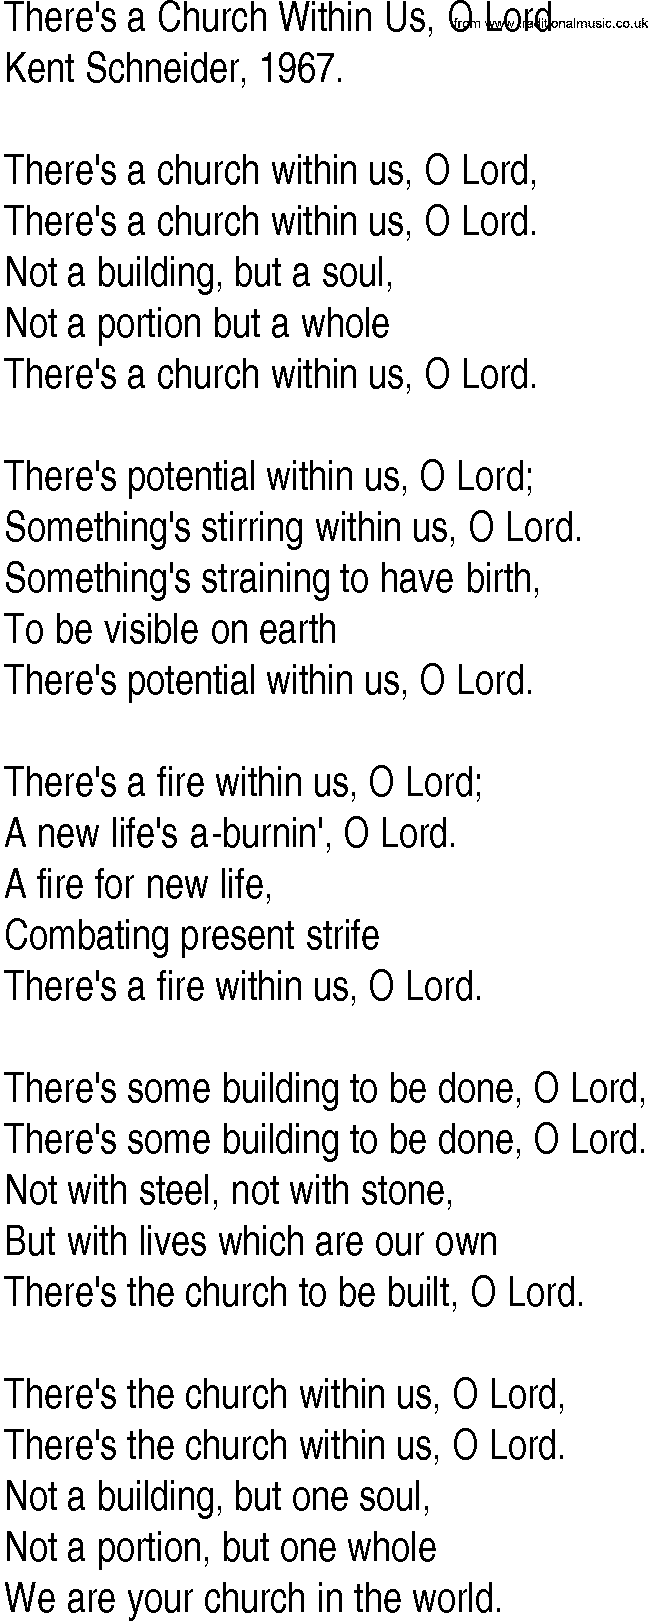 Hymn and Gospel Song: There's a Church Within Us, O Lord by Kent Schneider lyrics